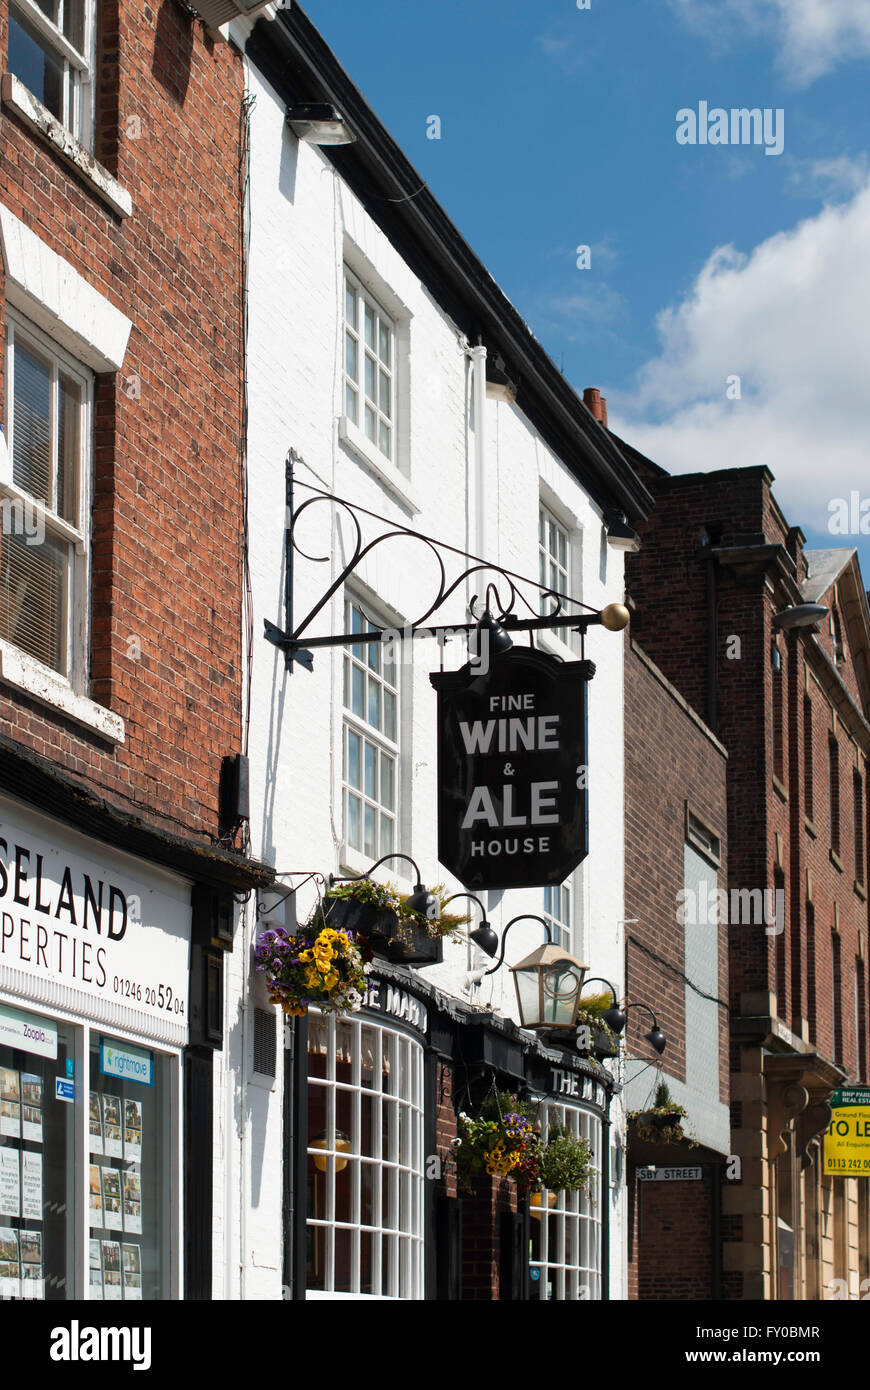 The Market Pub sign Chesterfield - showing Fine Wine and Ale house Stock Photo